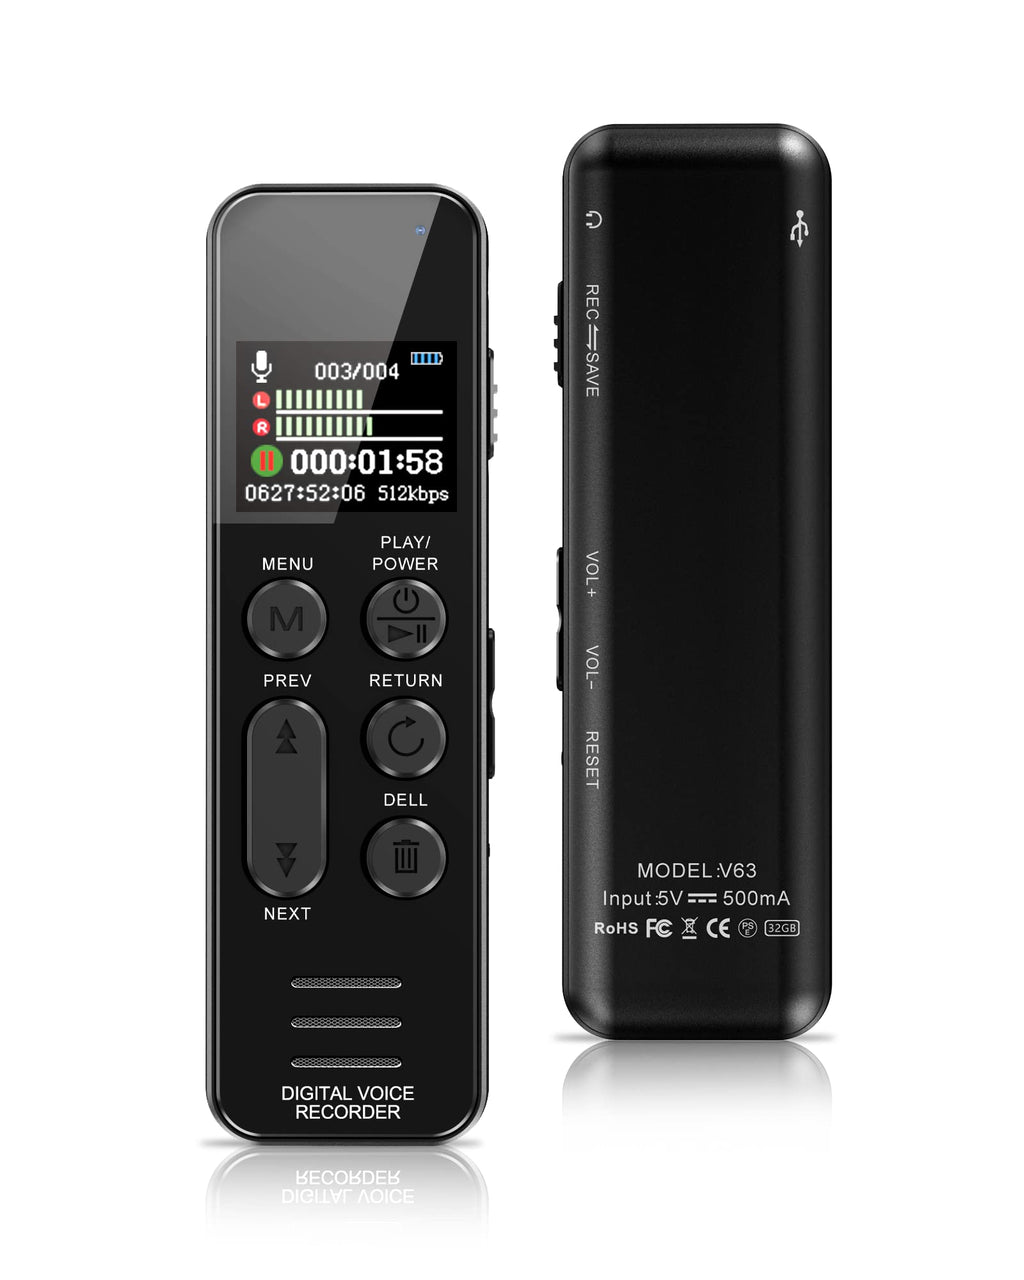  [AUSTRALIA] - 60H Voice Recorder with Playback, XIXITPY 64GB Audio Recorder with Port USB C, 750 Hours of Storage and 60 Hours of Continuous Recording, Voice Activated Recorder for Lectures, Meetings and More